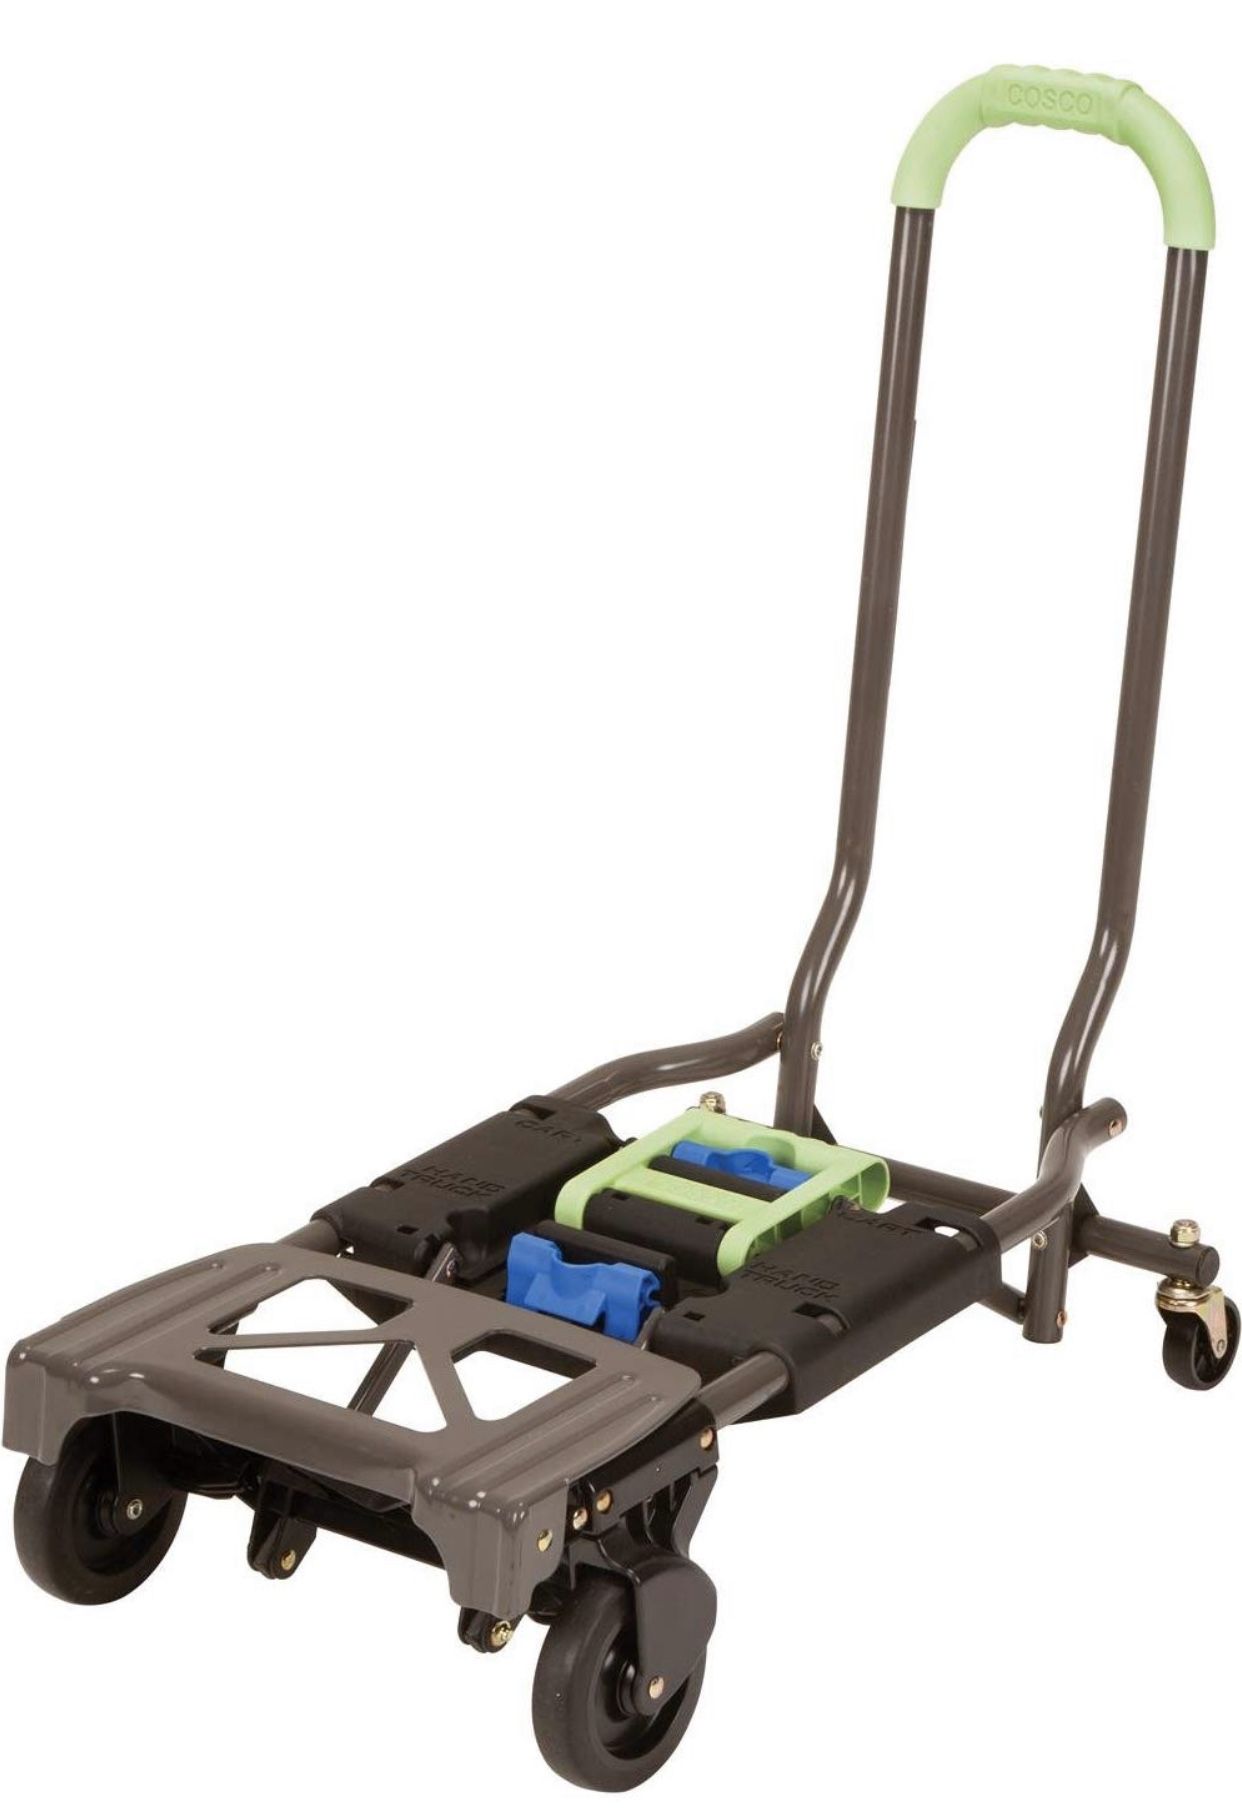 Shifter 300 lb. 2-In-1 Convertible Hand Truck and Cart